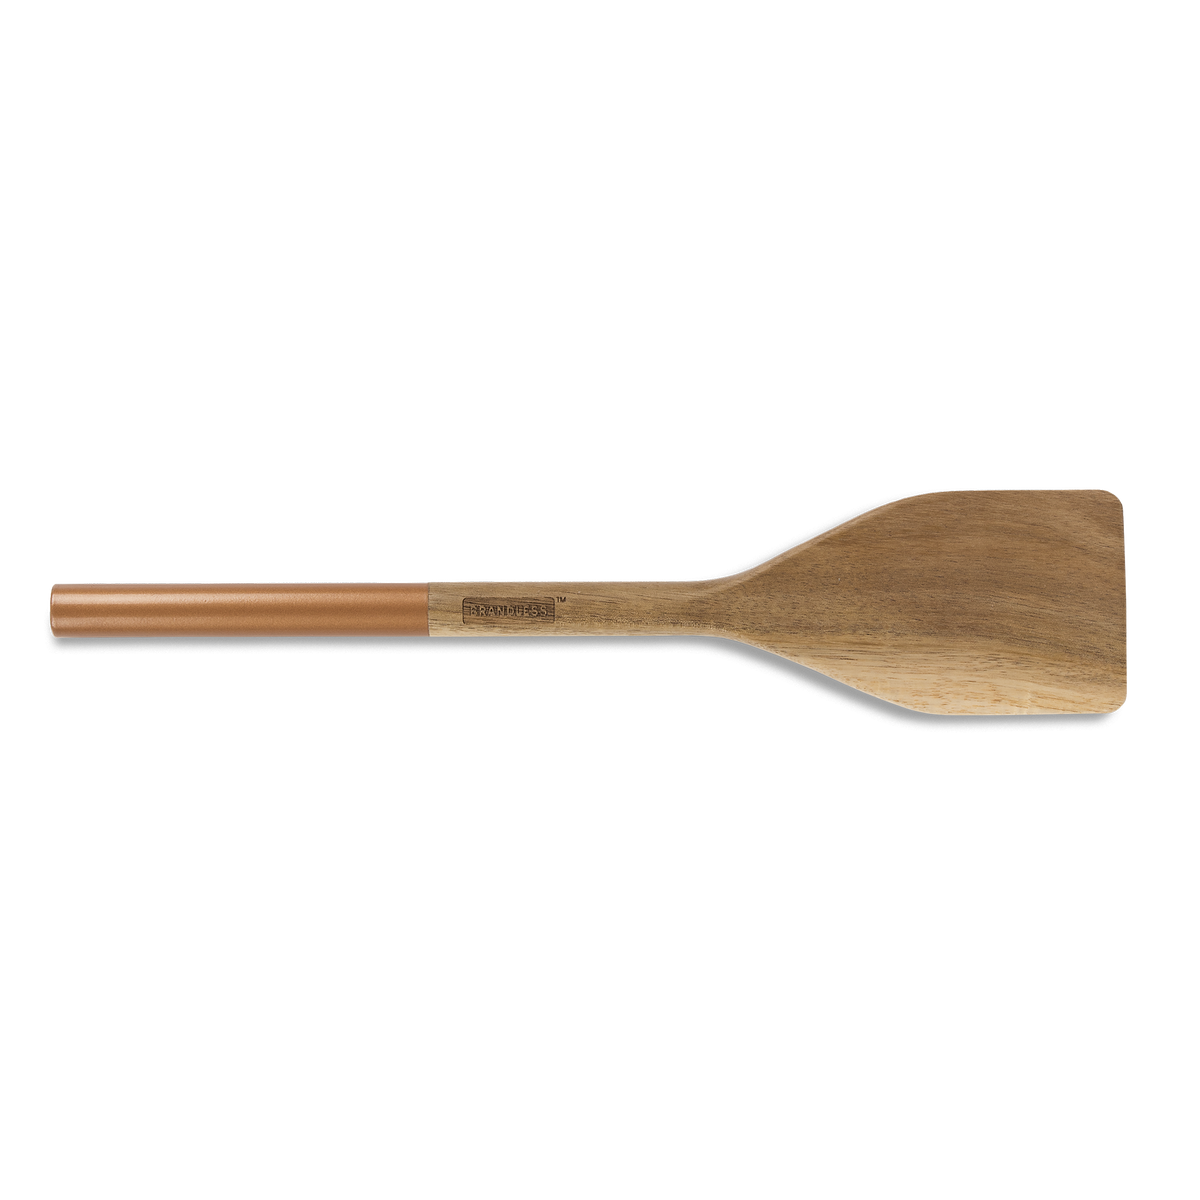 Product photo, acacia wood turner with copper color handle cap.